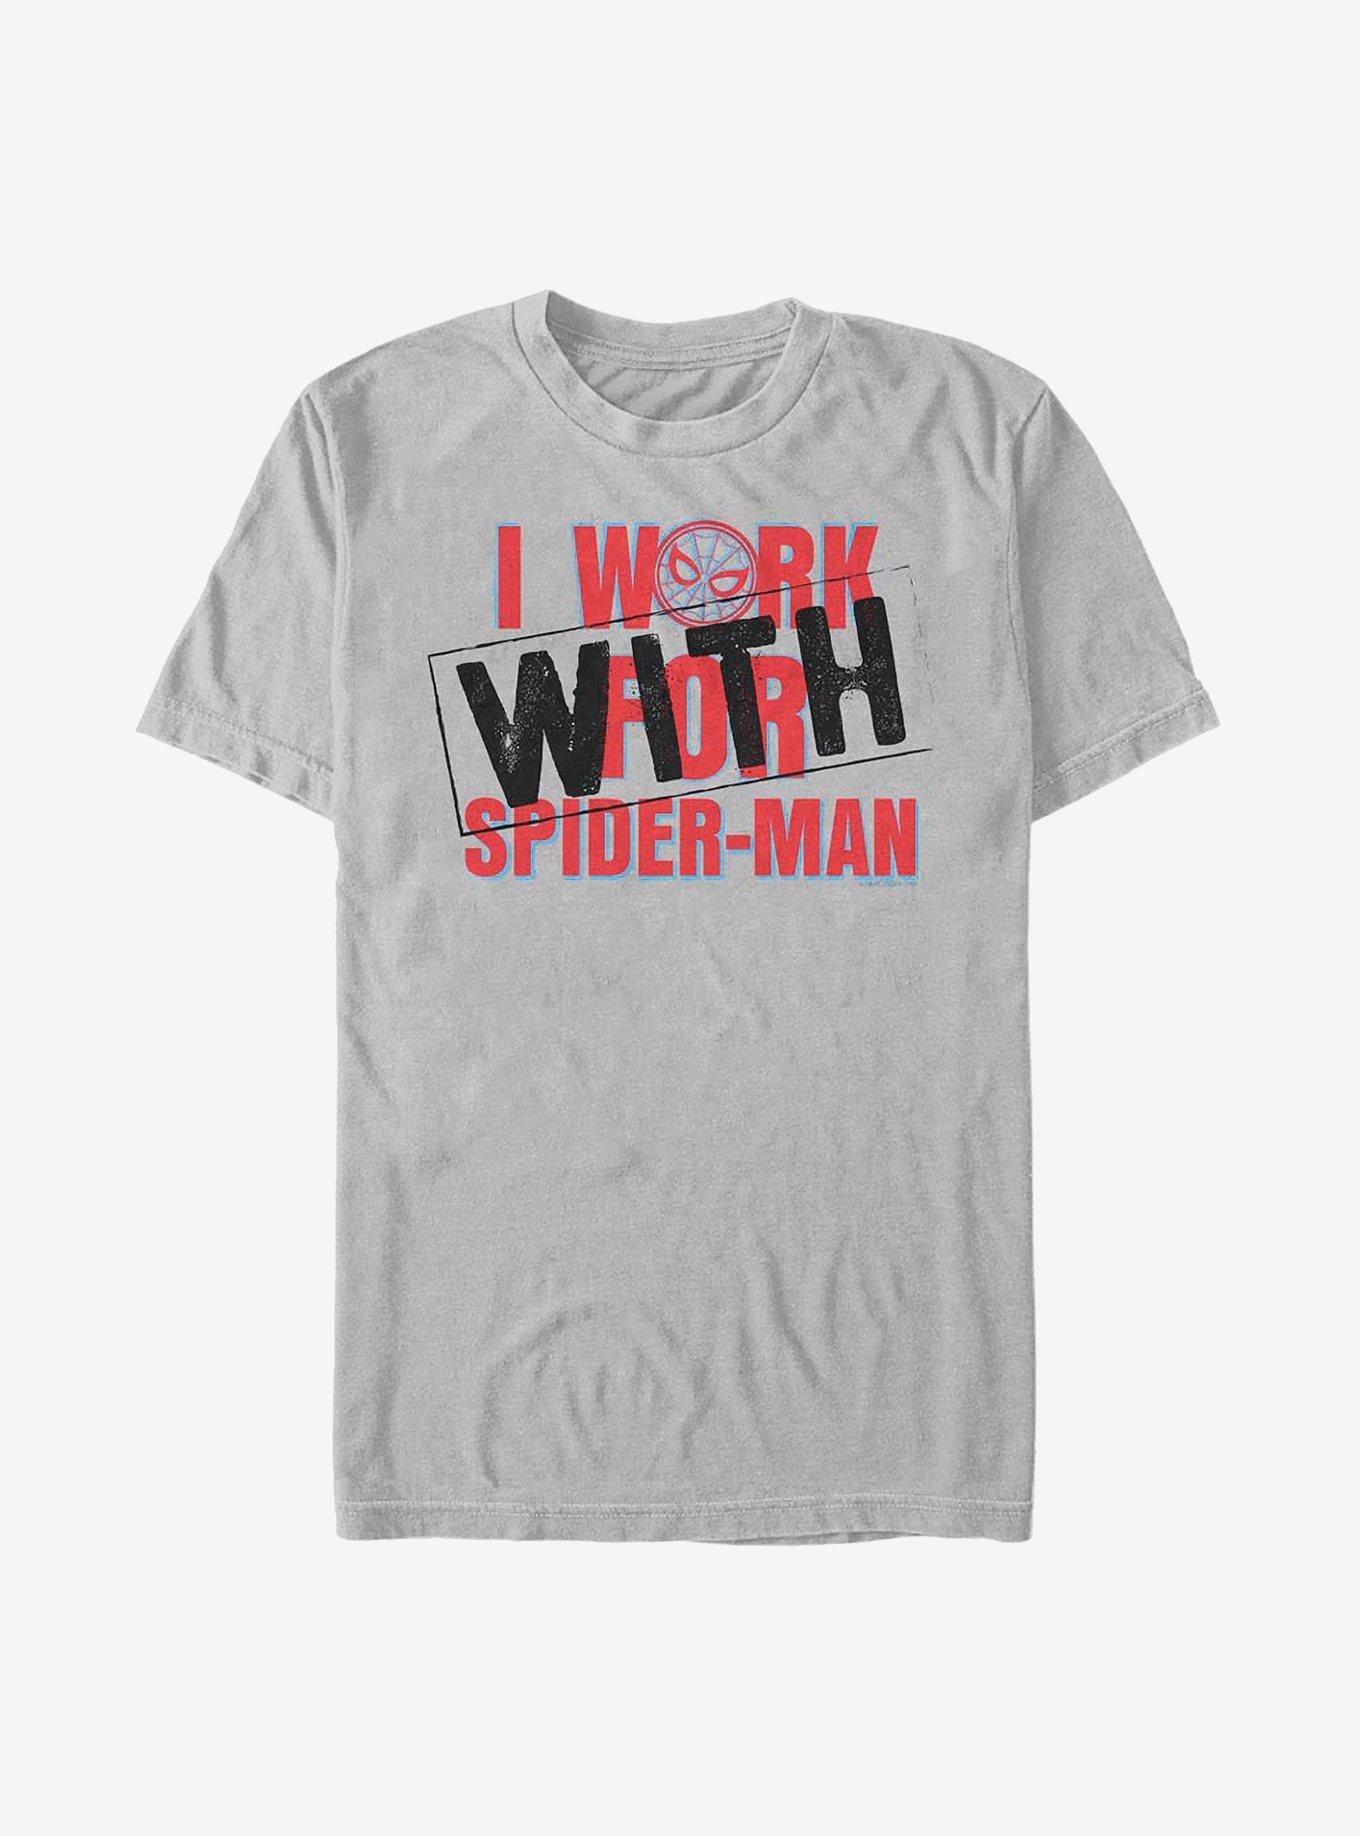 Marvel Spider-Man Work With Not For T-Shirt, SILVER, hi-res